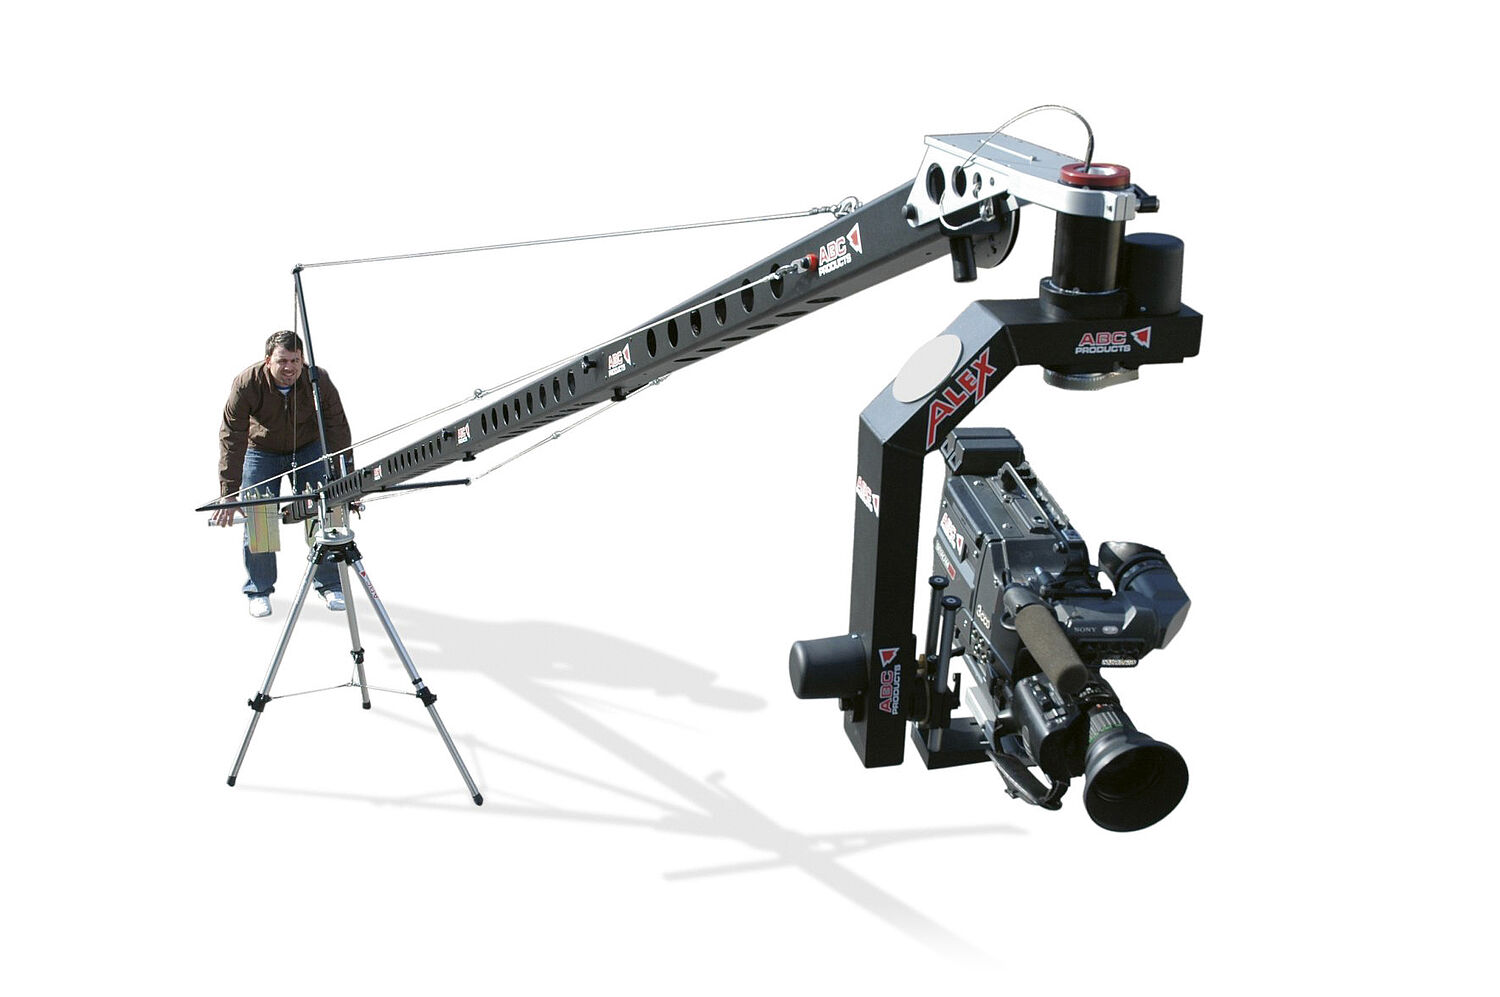 Motion Controllers in light construction cranes for movie and television filming